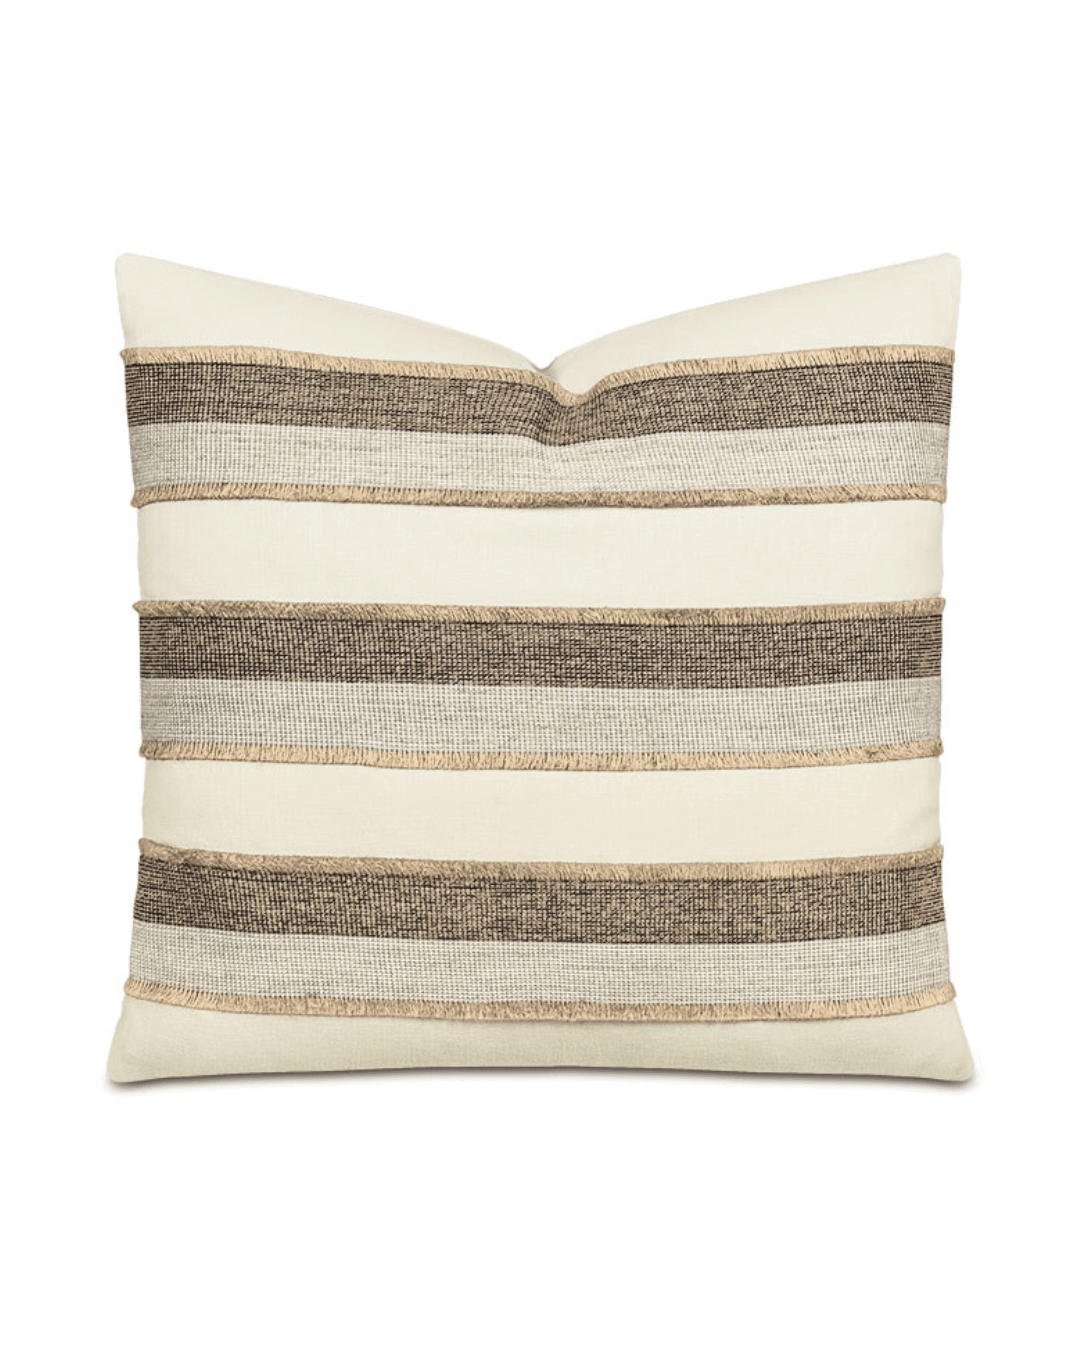 Mini Fringe Pillow with horizontal stripes in shades of beige, tan, and brown on a neutral background, embodying Arizona-style aesthetics by Eastern Accents.